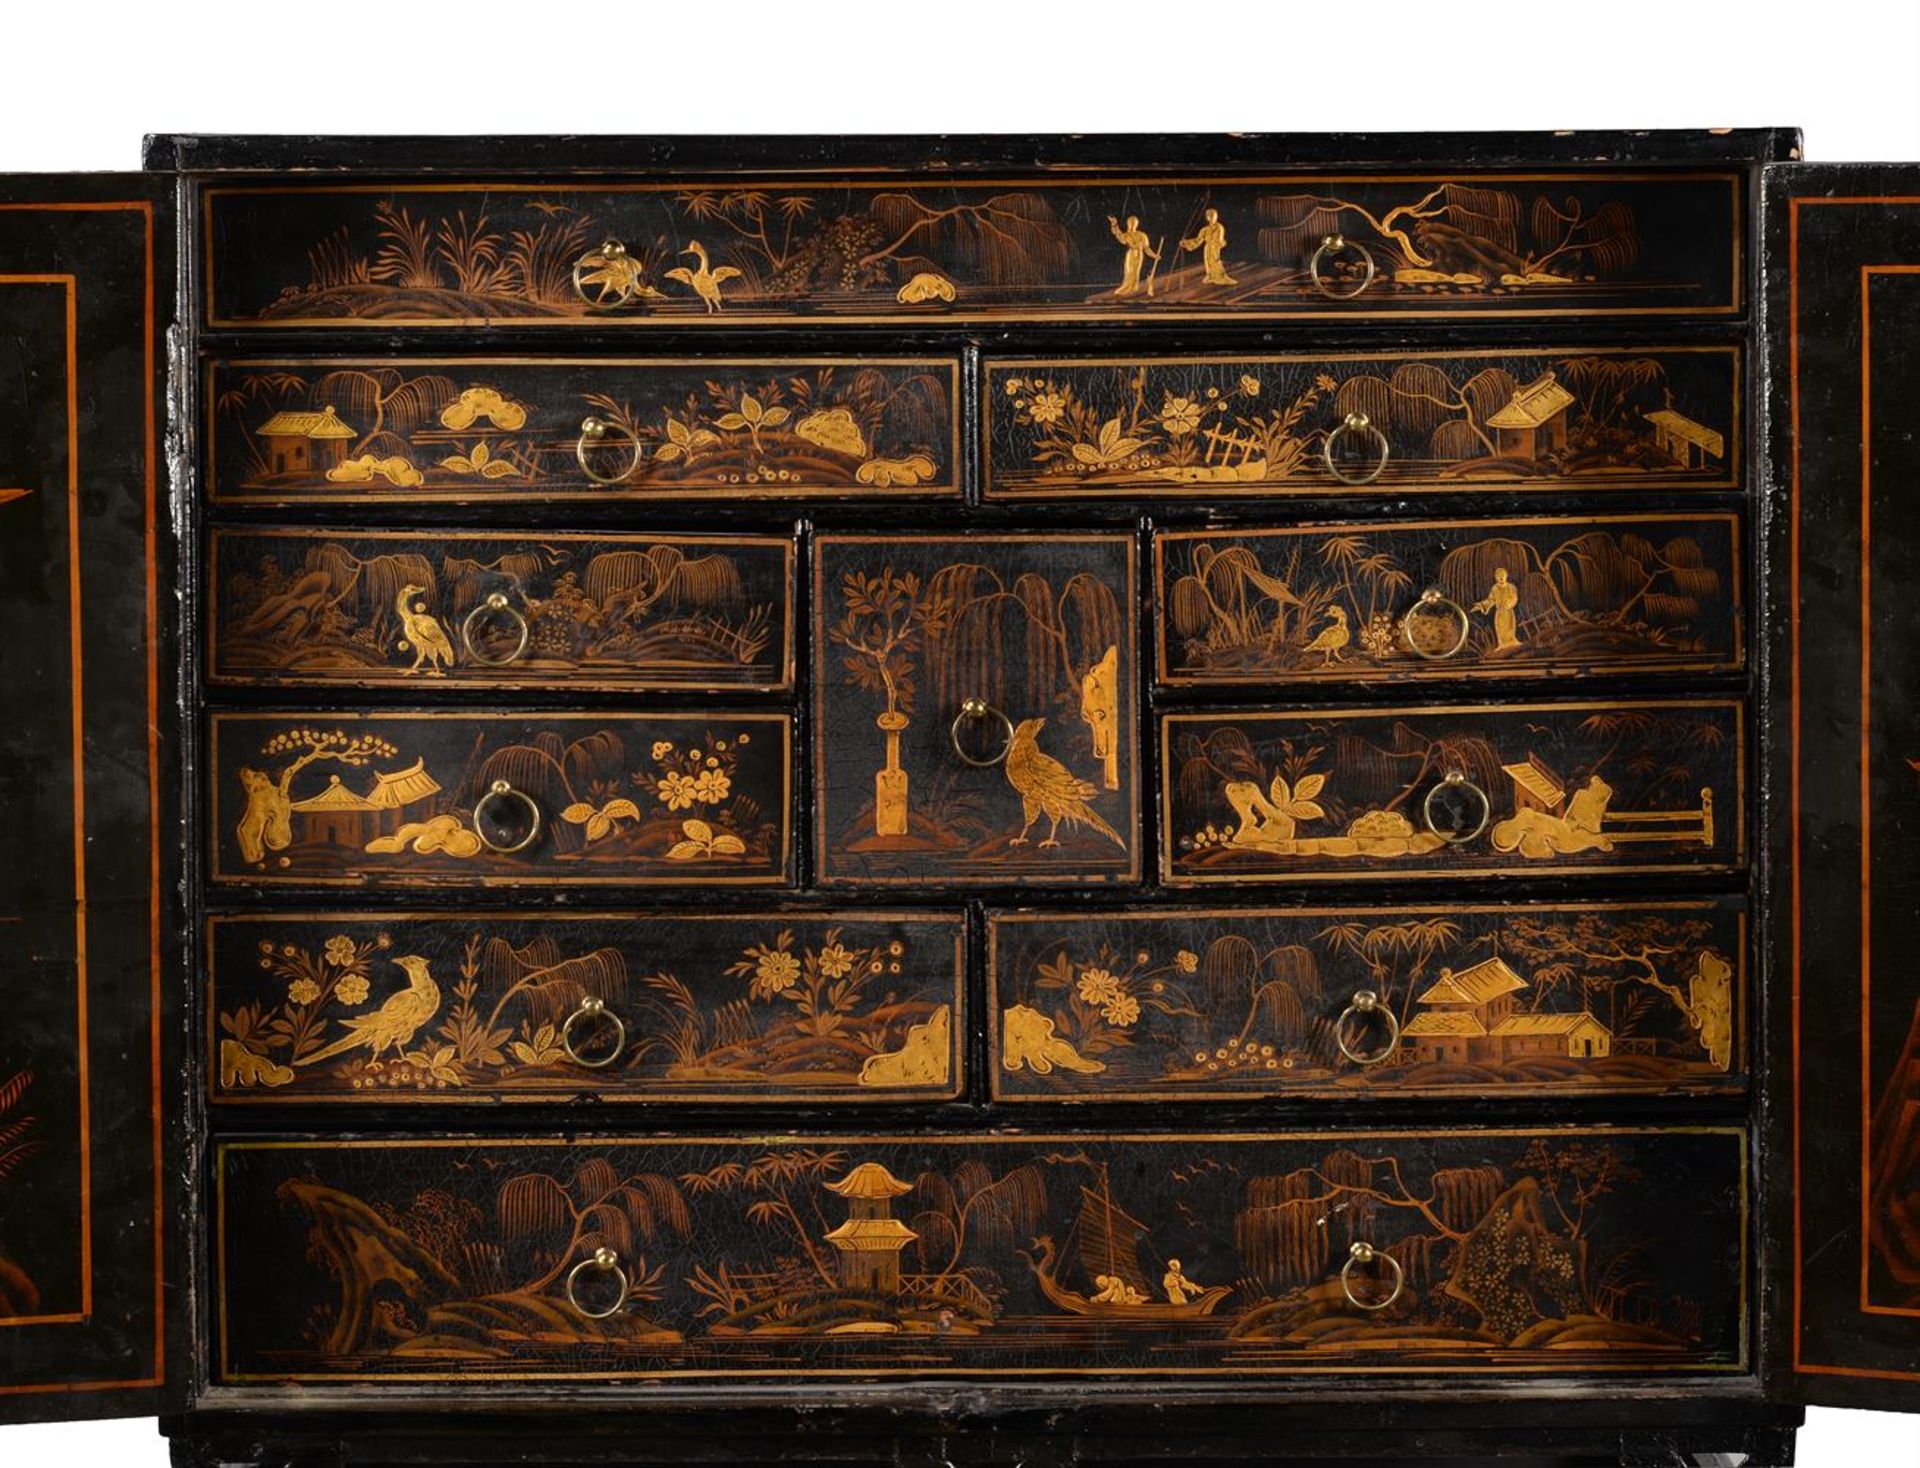 A BLACK LACQUER AND GILT CHINOISERIE DECORATED CABINET ON STAND, LATE 18TH OR EARLY 19TH CENTURY - Image 4 of 7